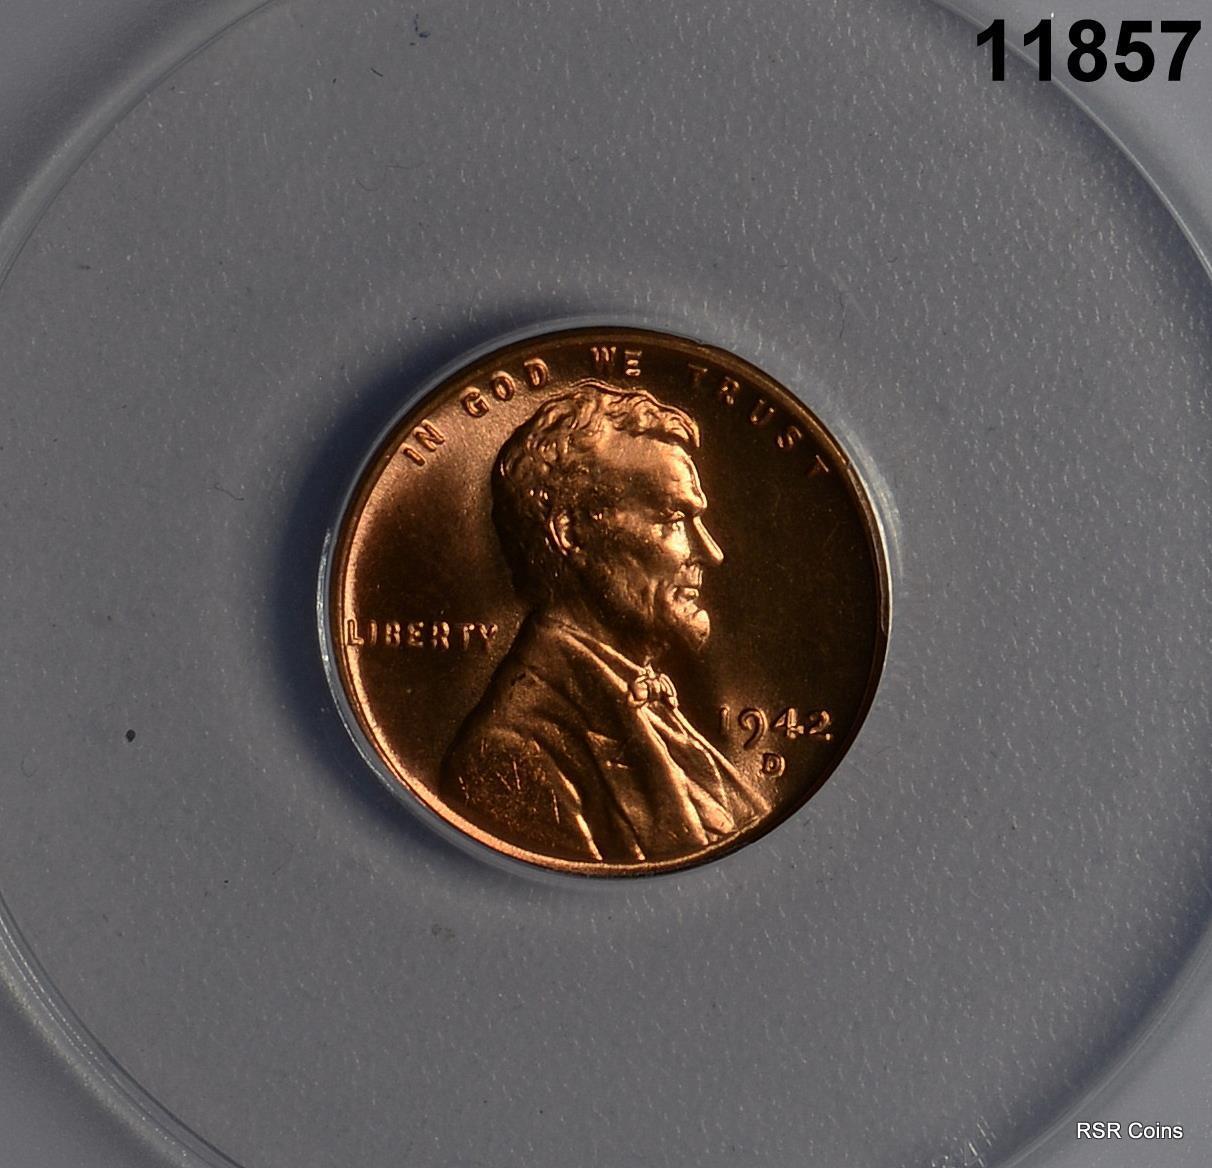 1942 D LINCOLN CENT ANACS CERTIFIED MS66! FINE RED! #11857